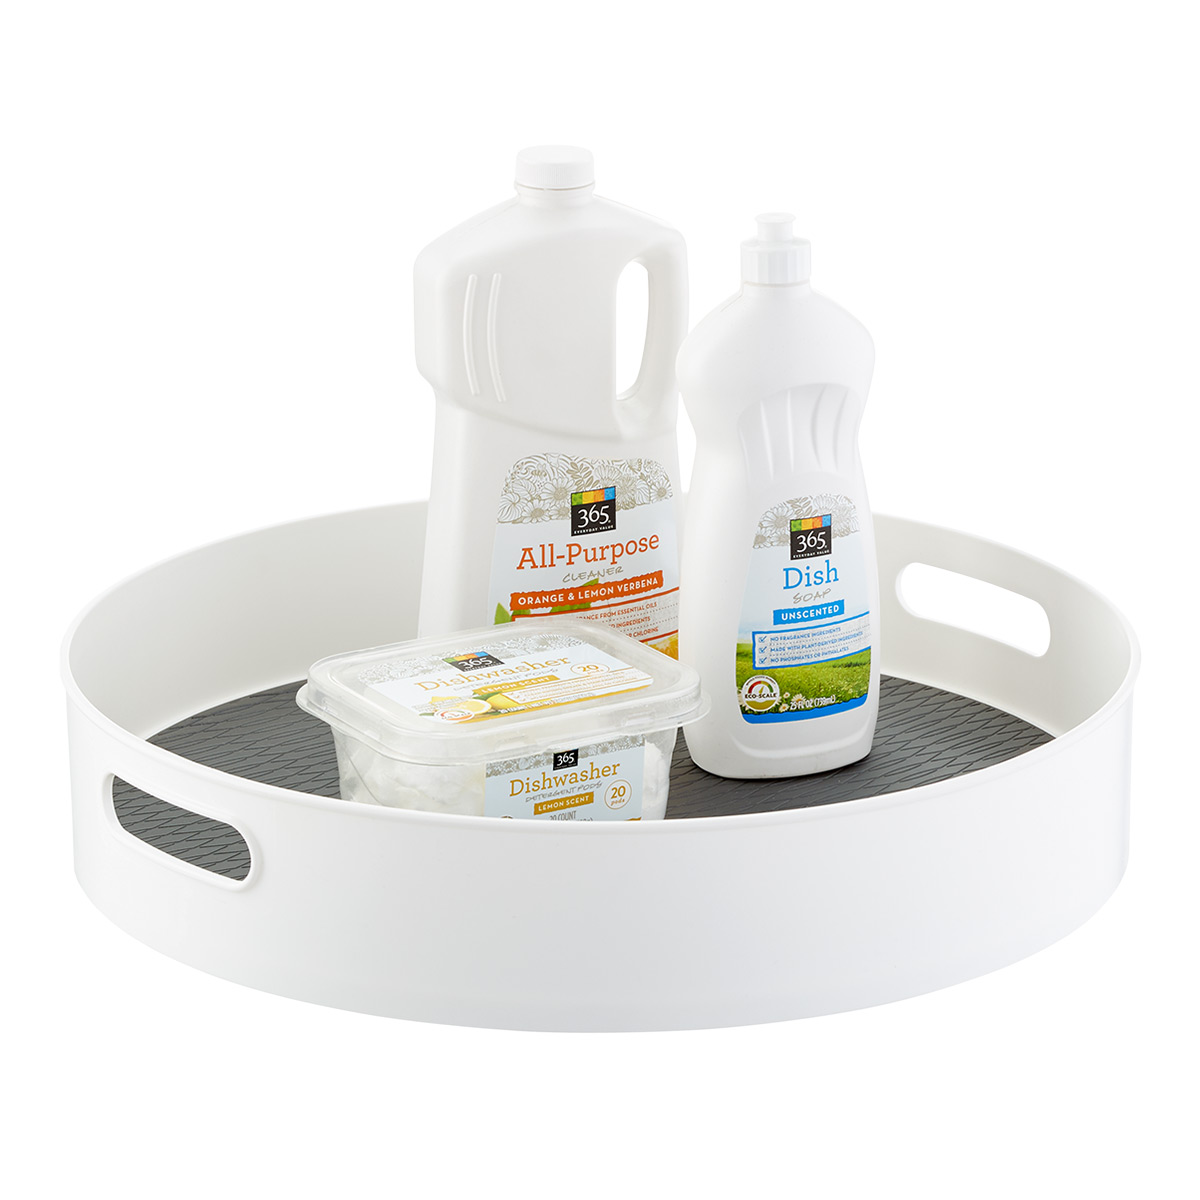 https://www.containerstore.com/catalogimages/351352/10075733-undersink-turntable-18in-wh.jpg